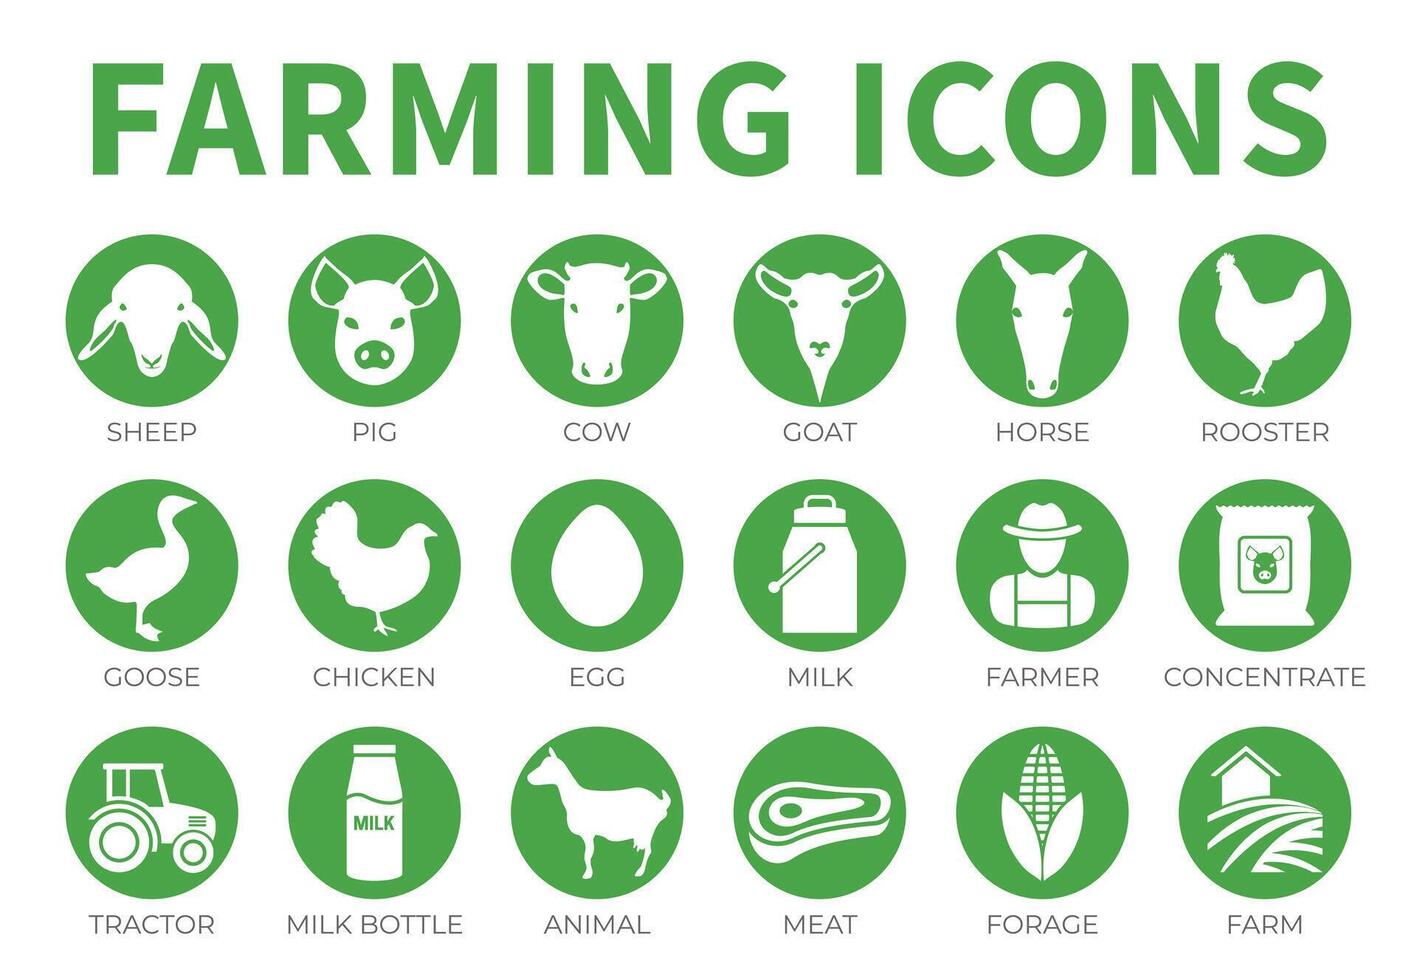 Green Farming or Farm Icon Set of Sheep, Pig, Cow, Goat, Horse, Rooster, Goose, Chicken, Egg, Milk, Farmer, Concentrate, Tractor, Bottle, Animal, Meat and Forage Icons. vector